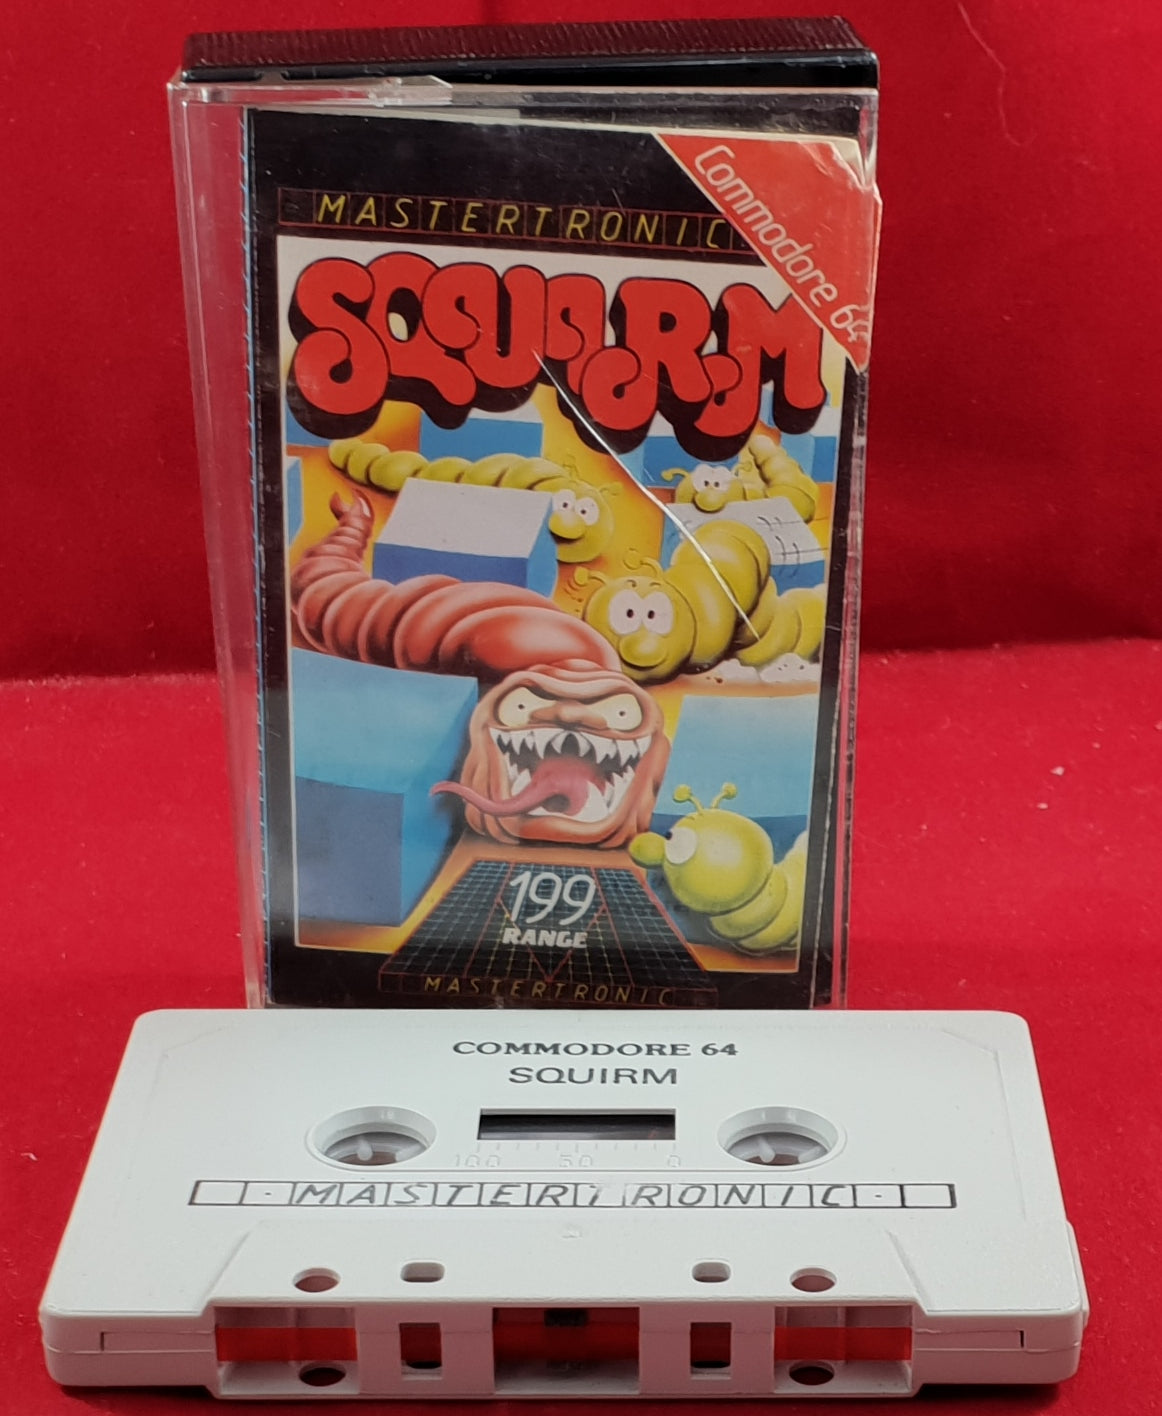 Squirm Commodore 64 Game